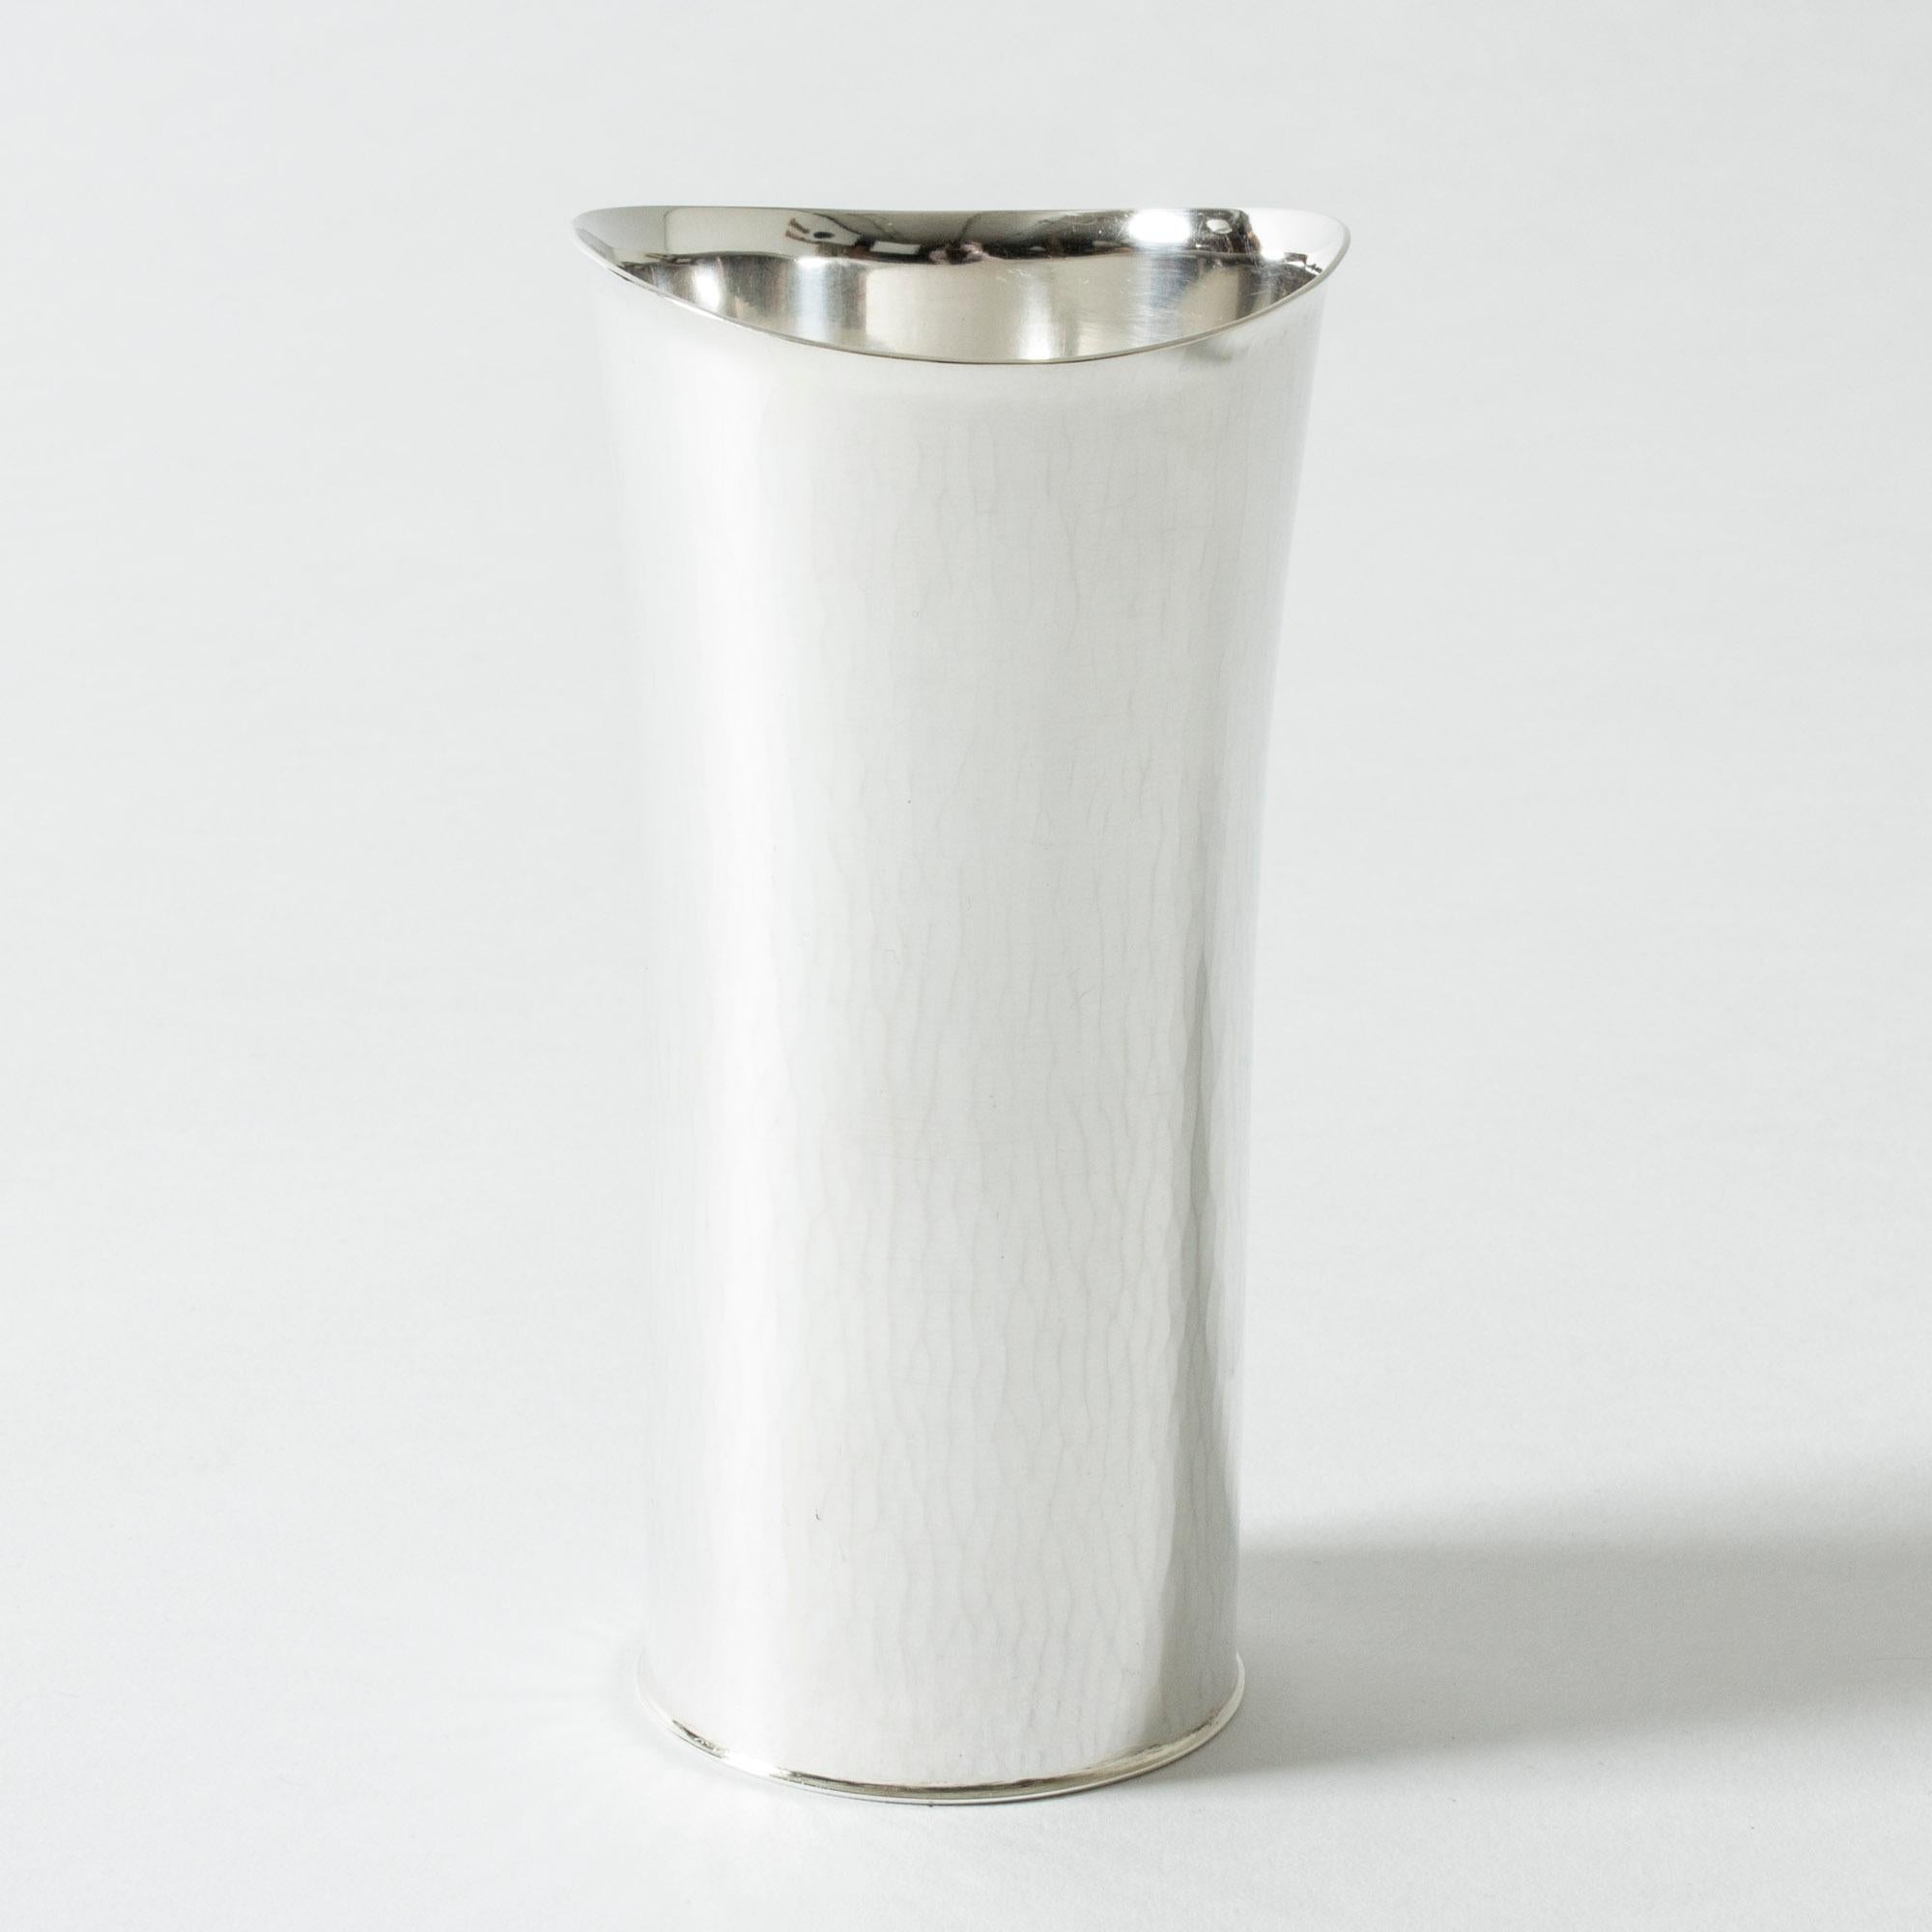 Elegant silver vase by Sigurd Persson, in a simplistic design that enhances the delicately hammered surface.